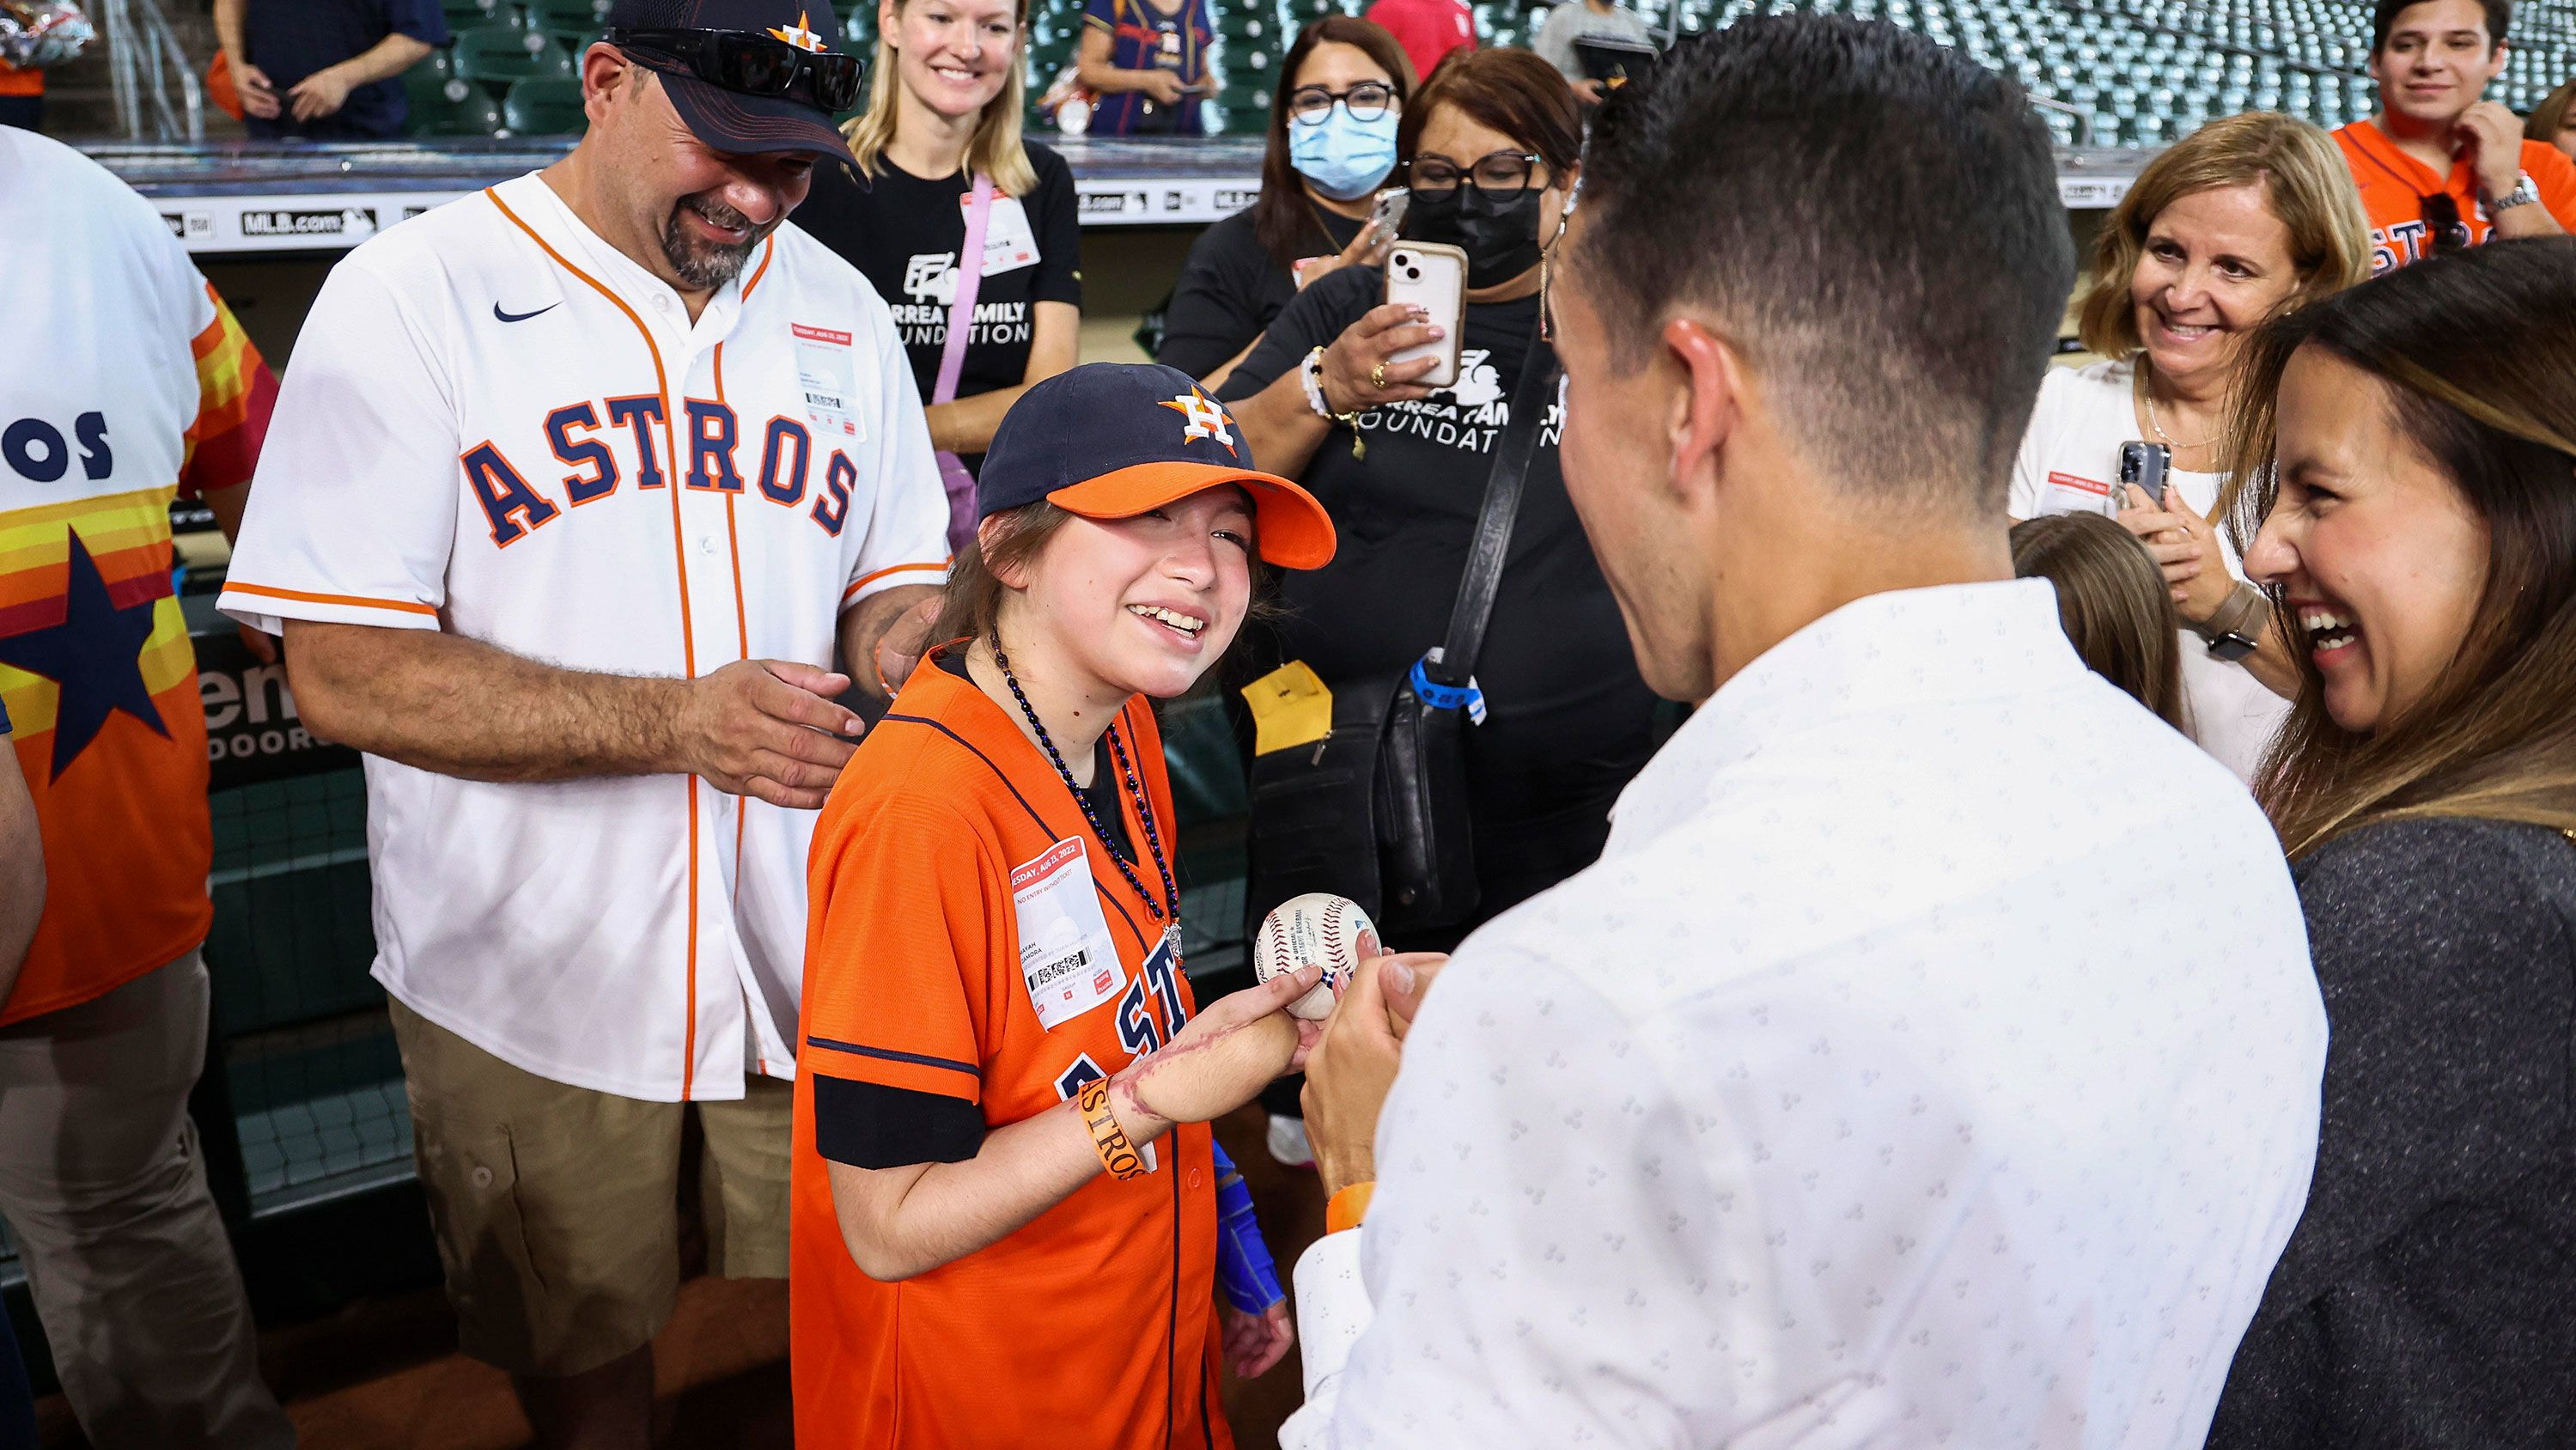 Mayah, shown at Tuesday's Astros game, endured more than 20 surgeries after the shooting in May.